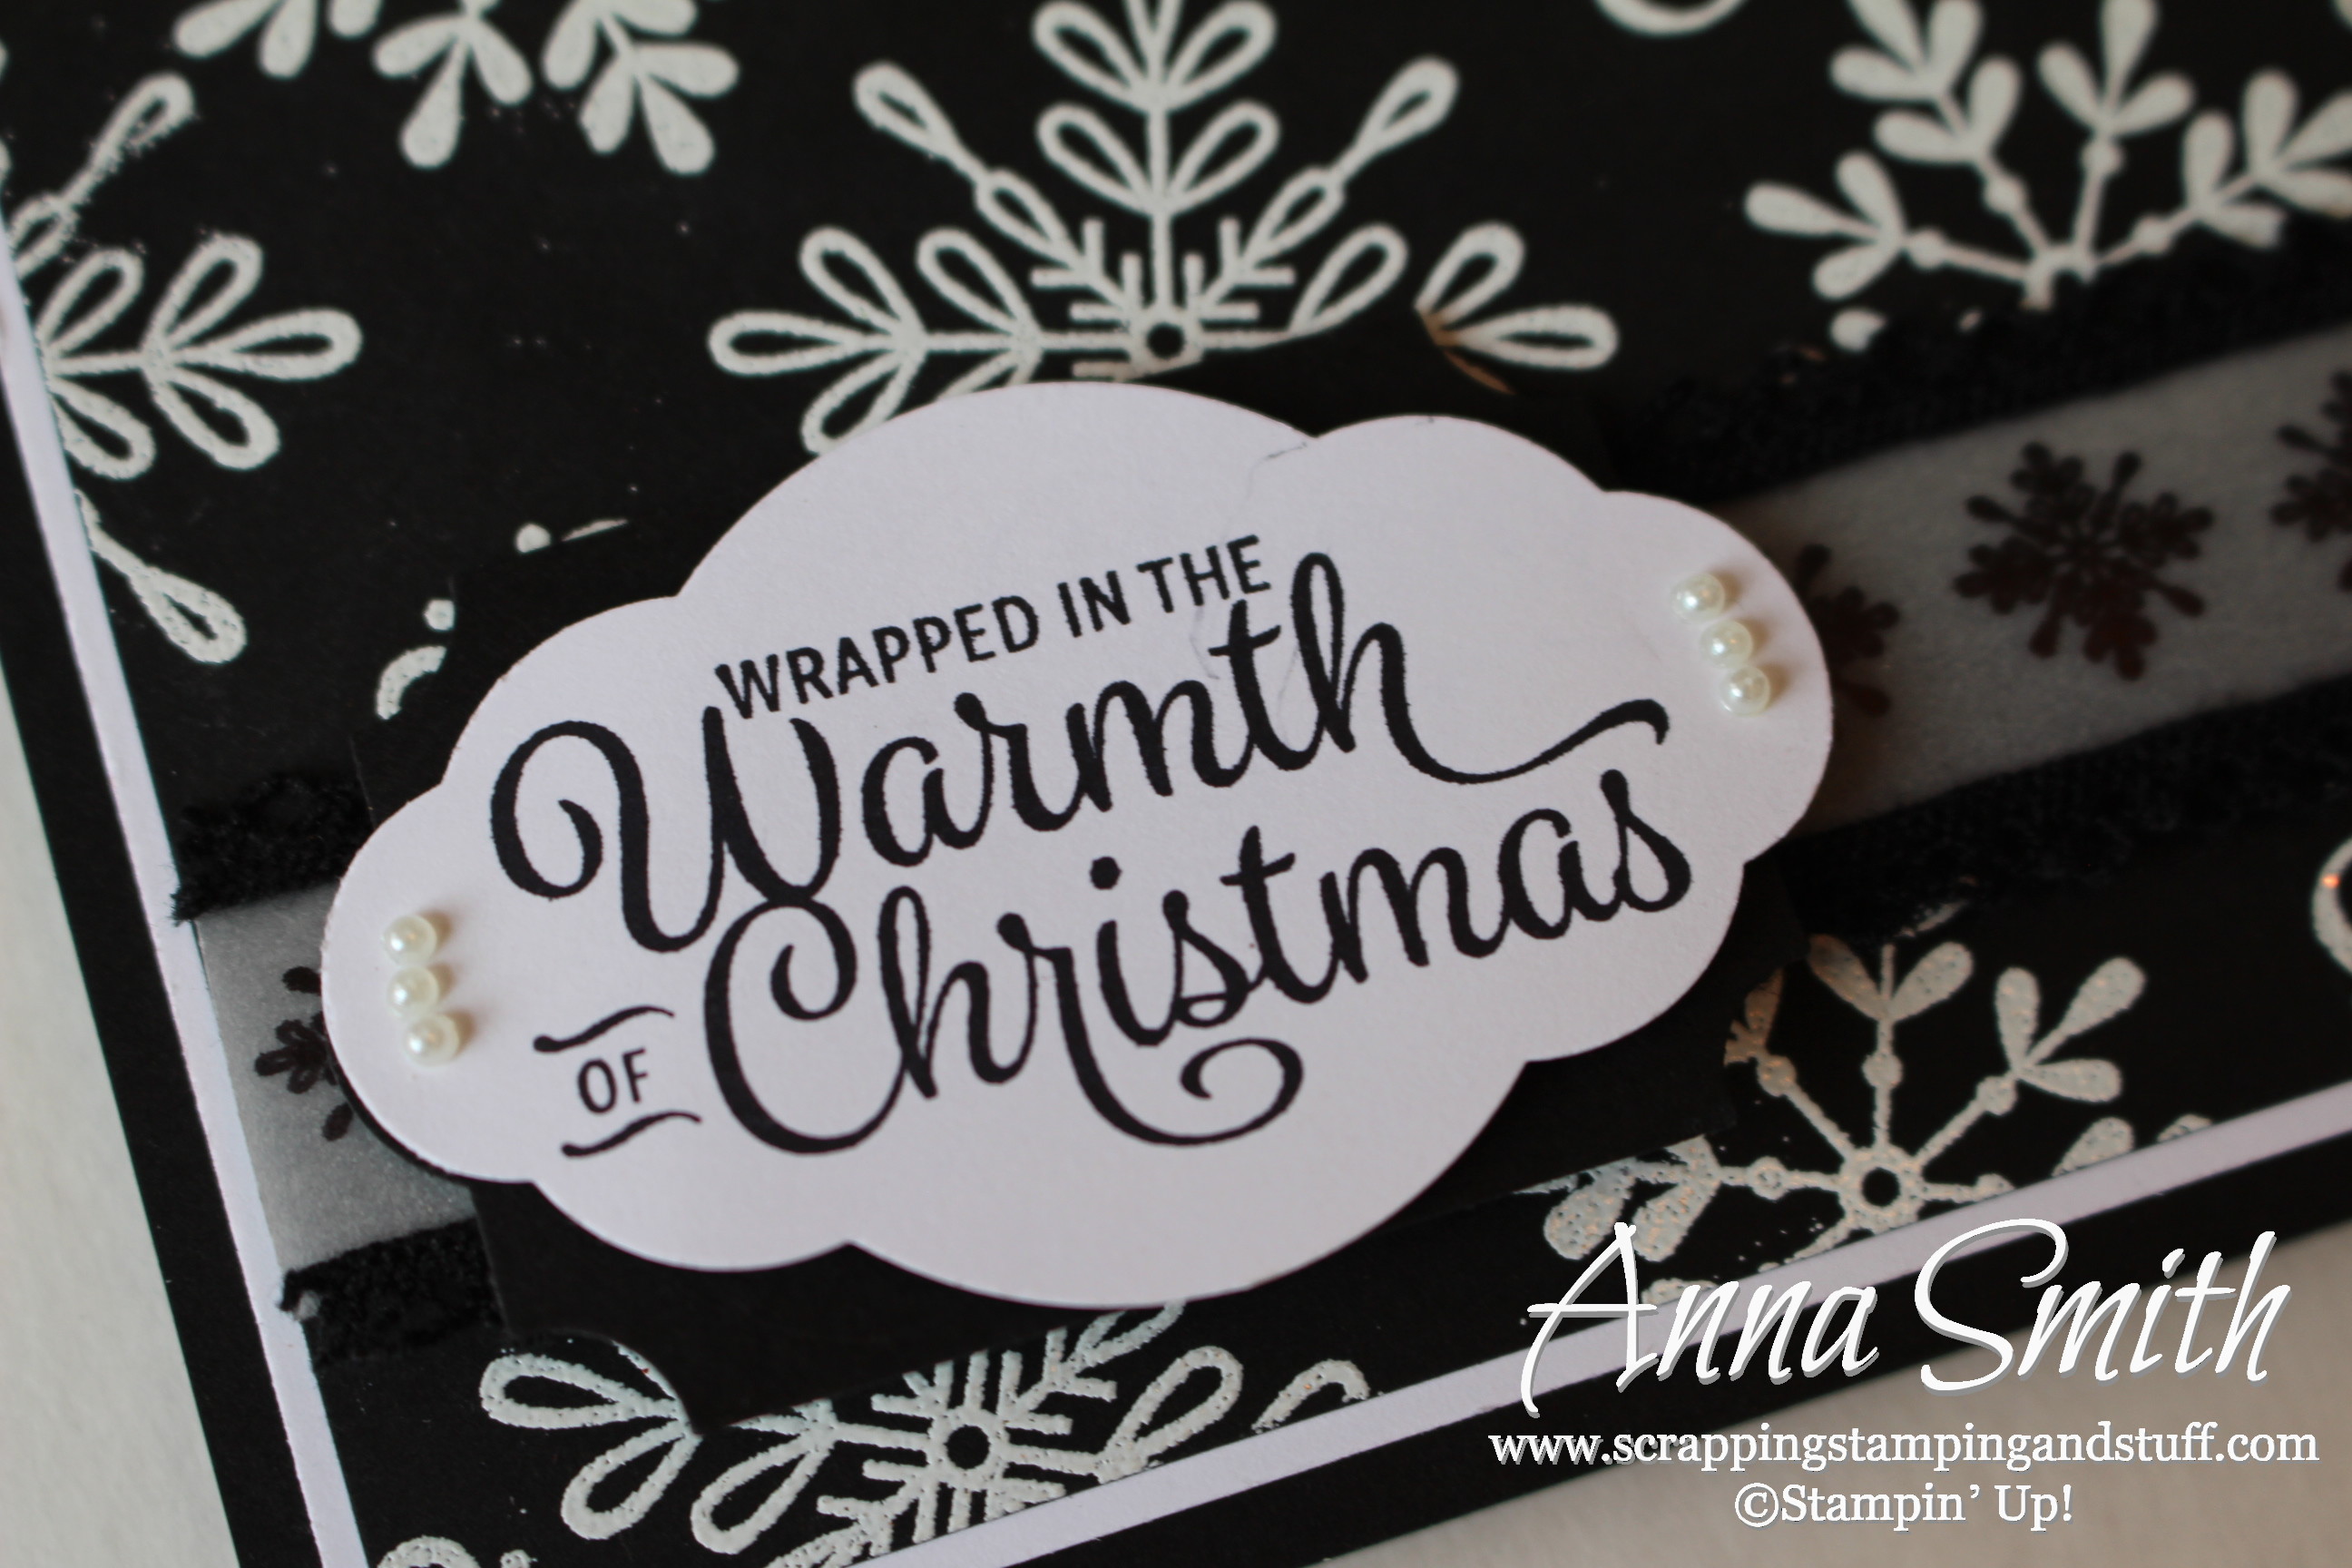 Stampin’ Up! Vintage Crochet Trim Blog Hop – A Snowflake Sentiments Black and White Christmas Card